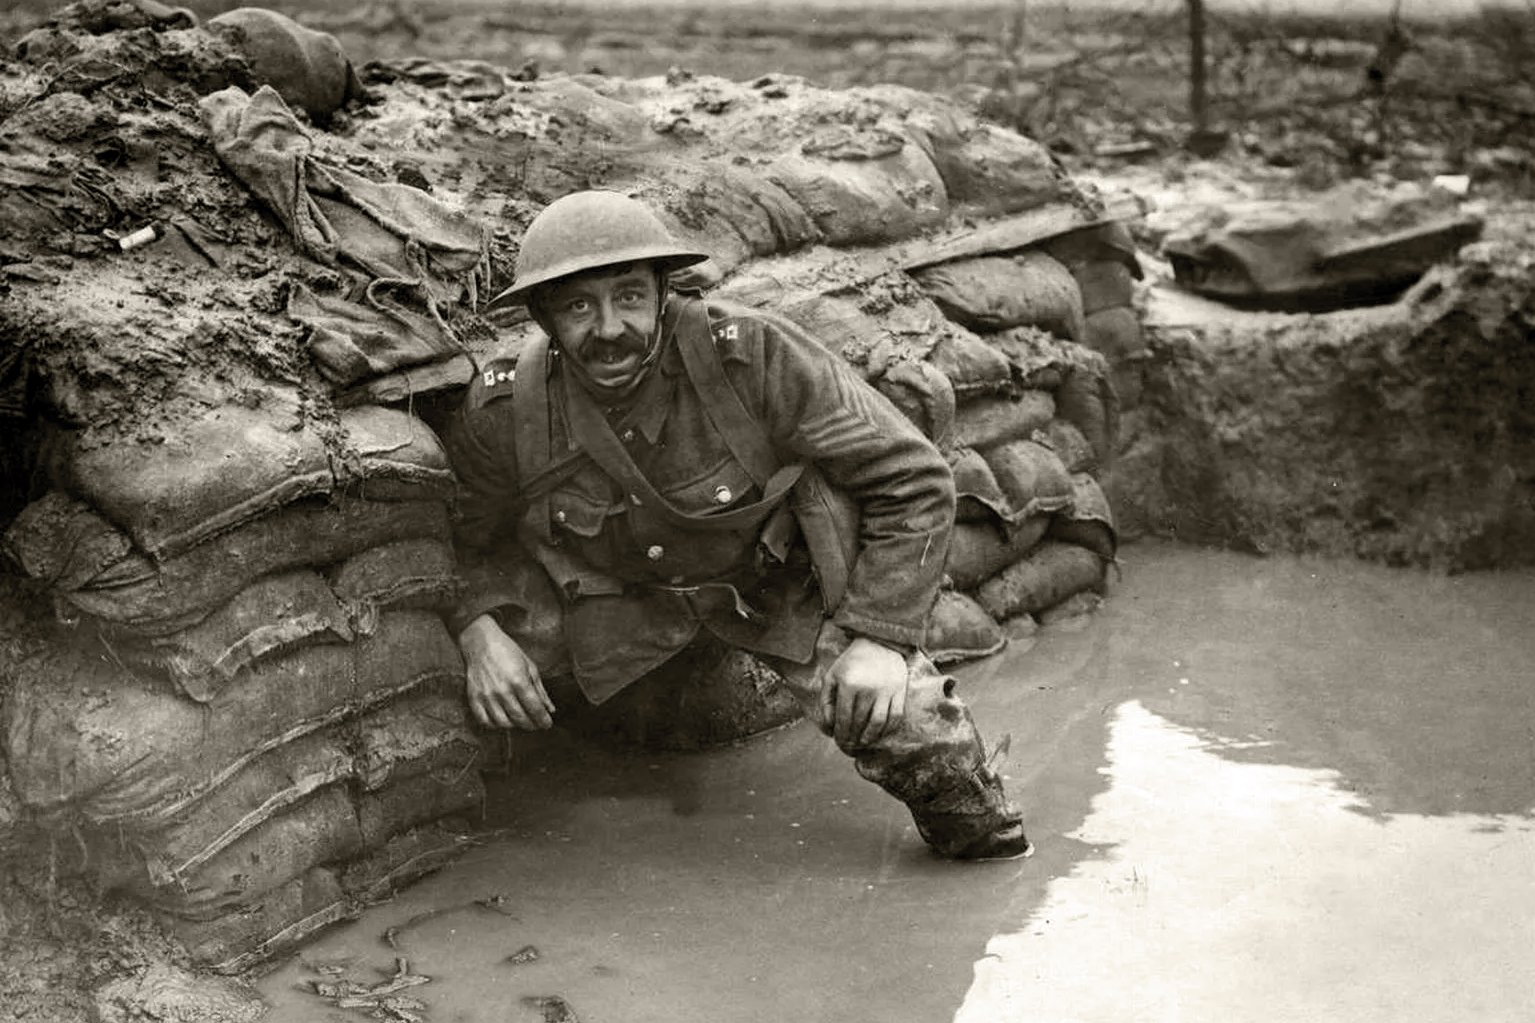 A black and white photo of a soldier in a flooded trench during World War II.